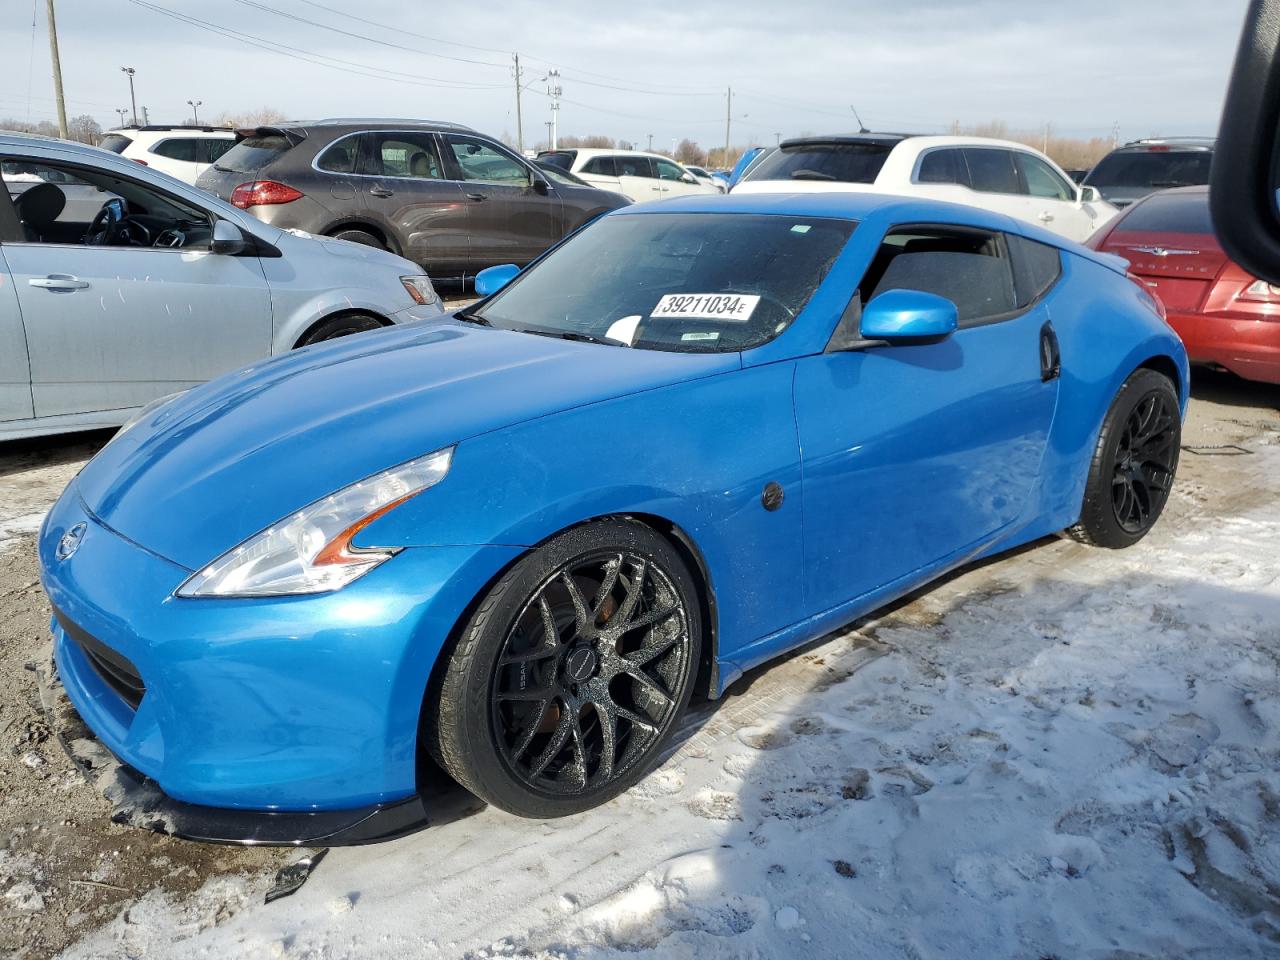 vin: JN1AZ4EH9AM506844 JN1AZ4EH9AM506844 2010 nissan 370z 3700 for Sale in 46254 2452, In - Indianapolis, Indianapolis, USA